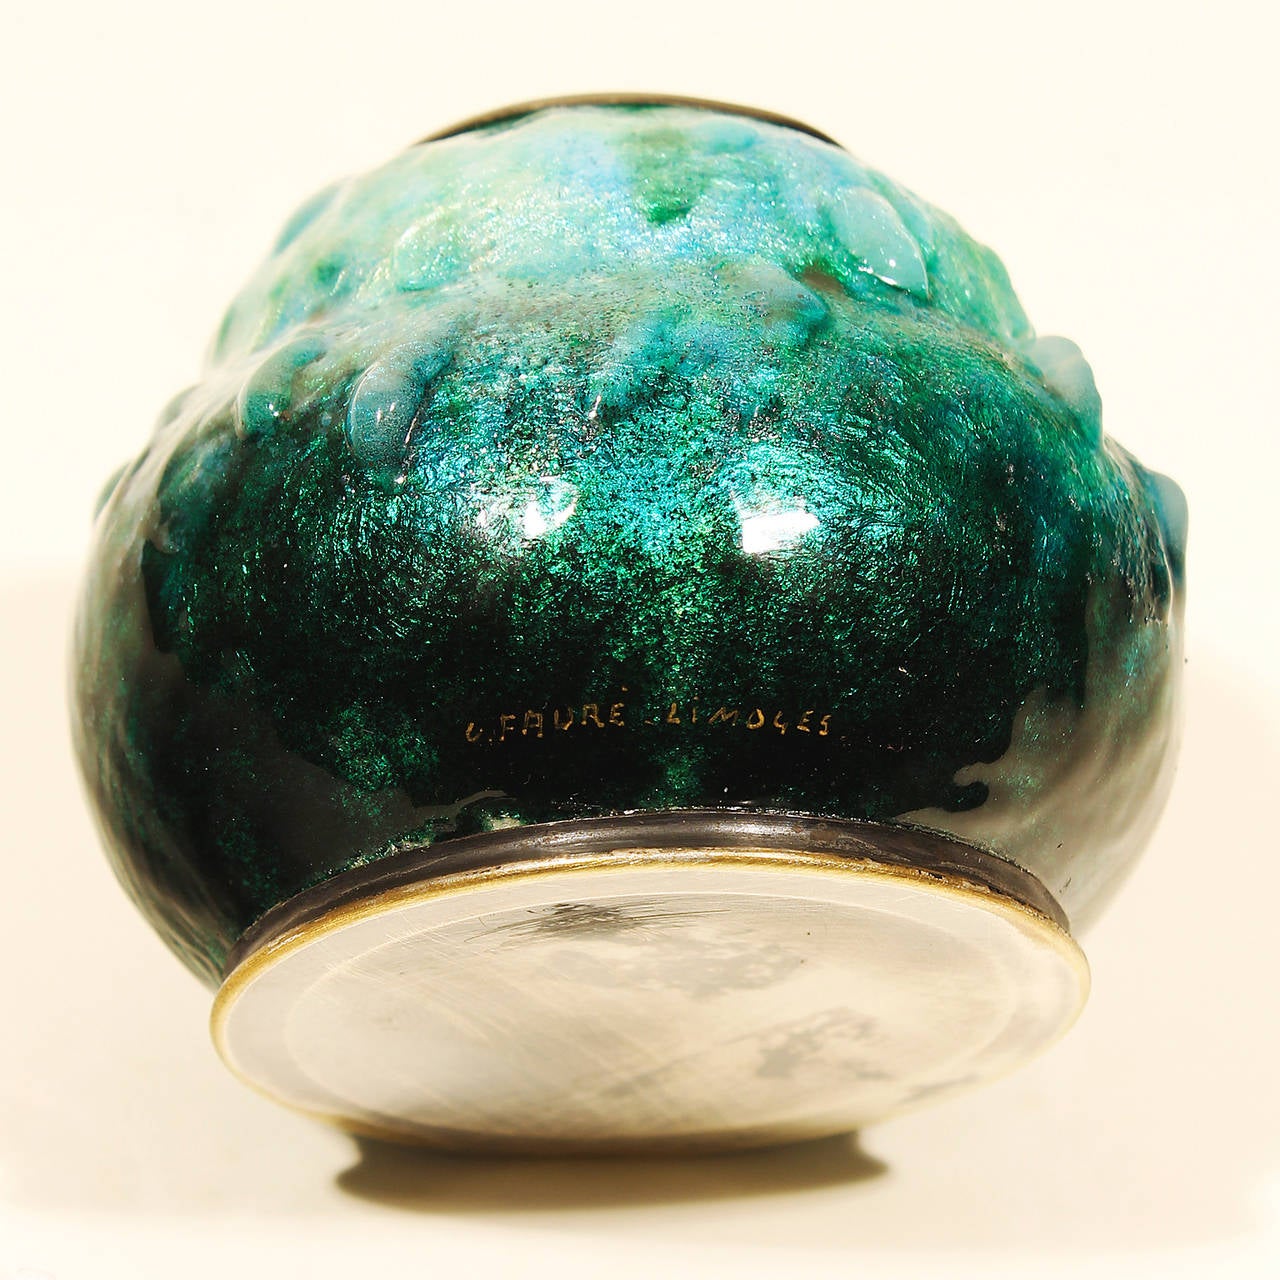 Early 20th Century Camille Fauré - Limoges, small vase